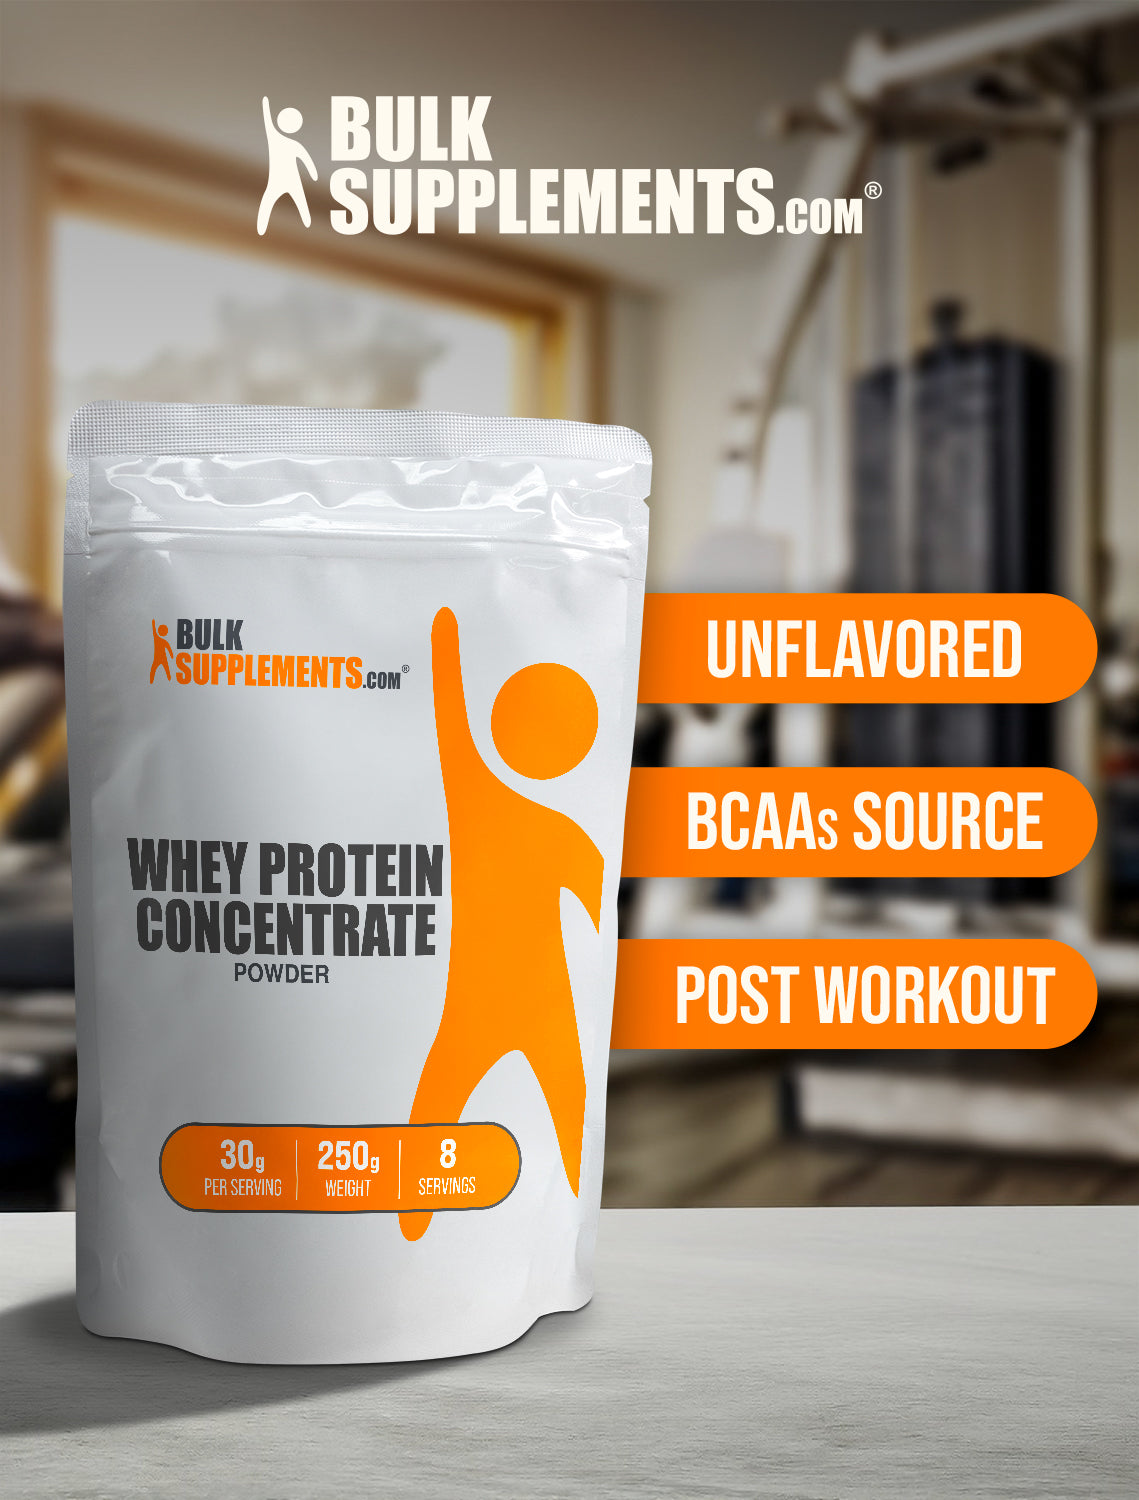 Whey protein concentrate powder 250g keywords image